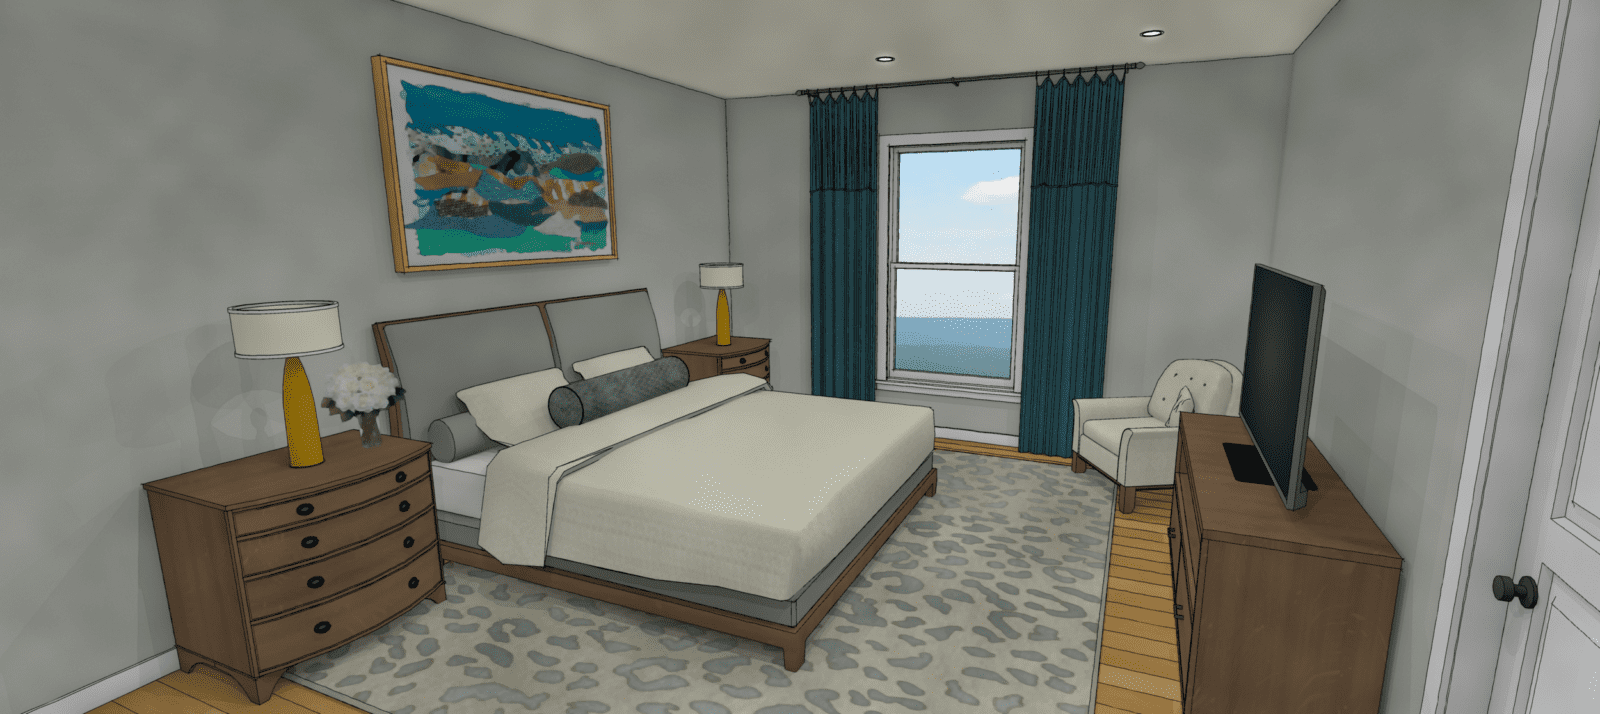 virtual bedroom furniture placement